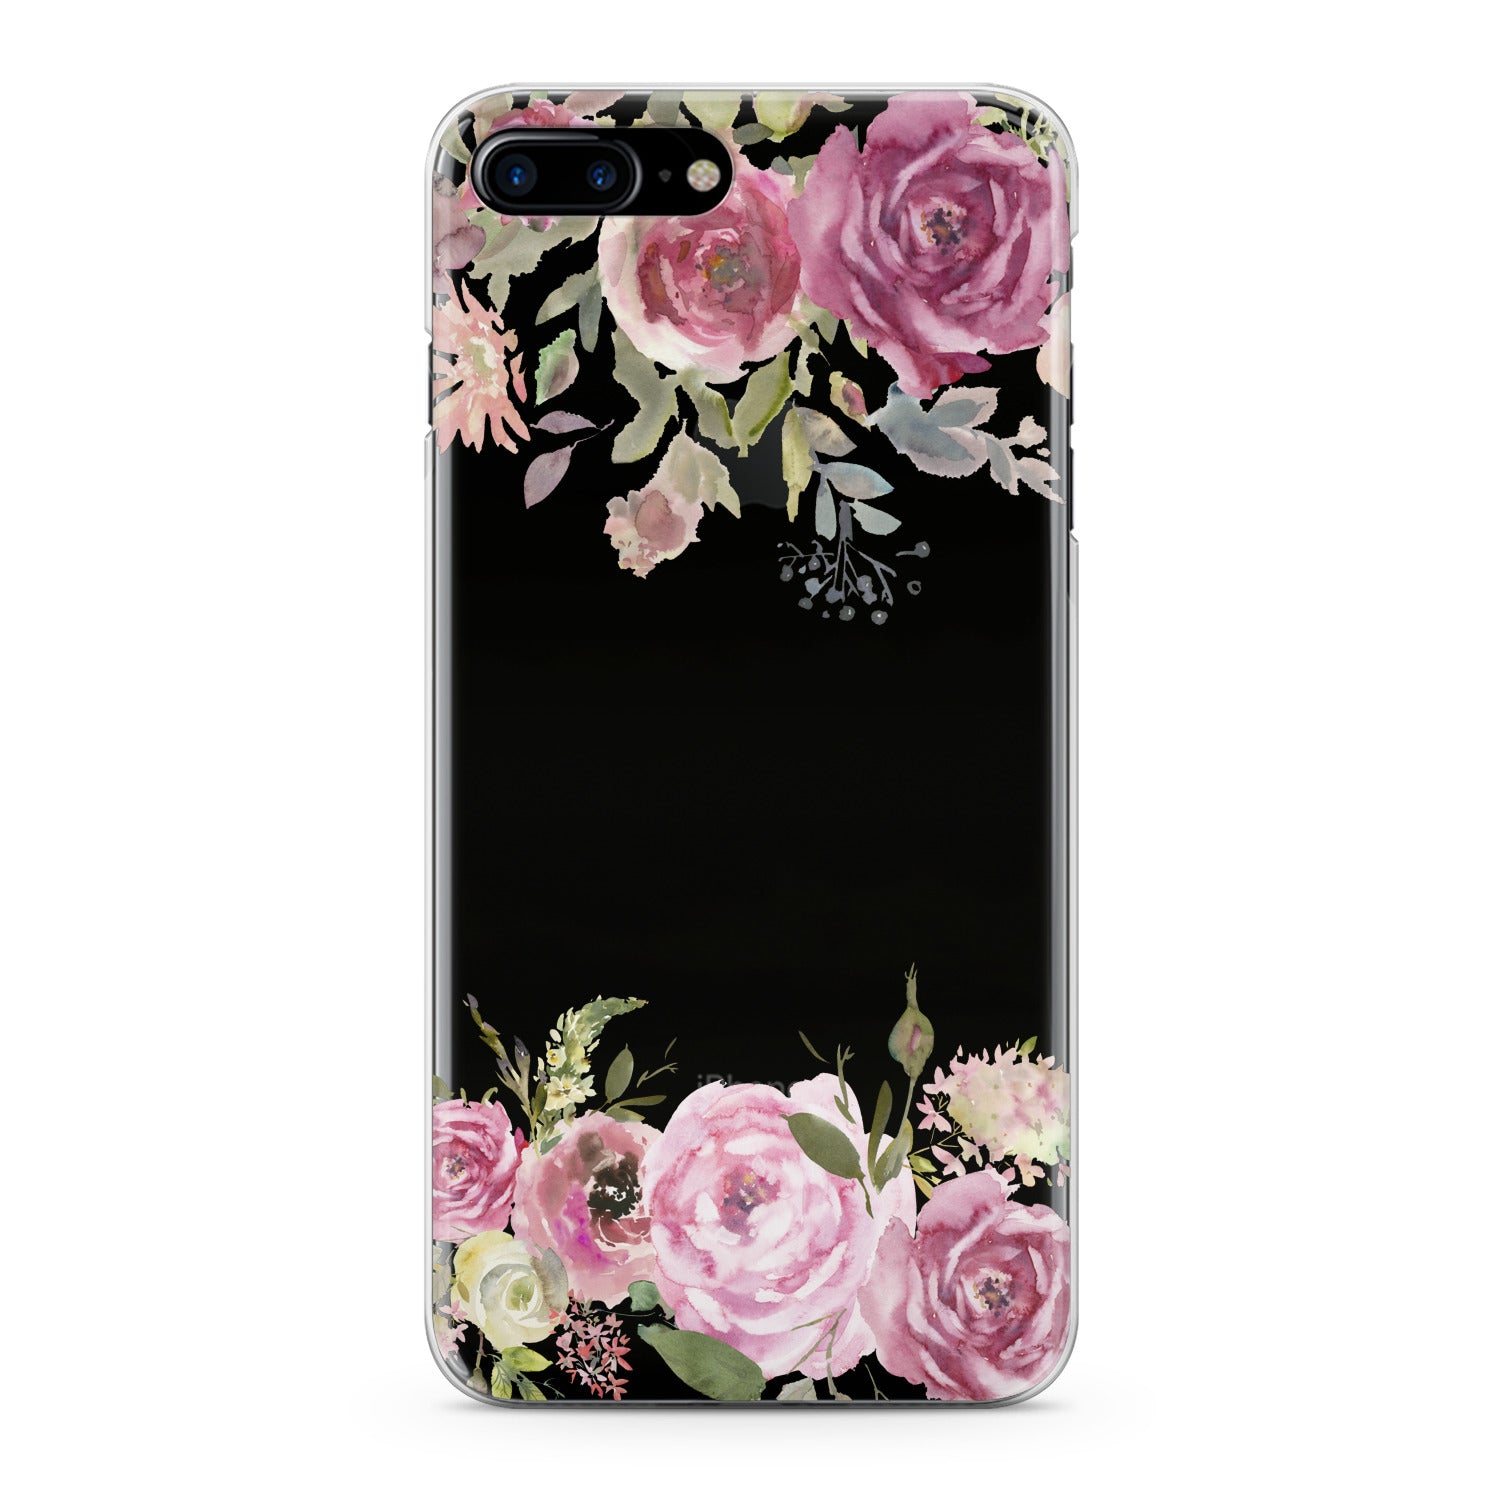 Lex Altern Watercolor Pink Roses Phone Case for your iPhone & Android phone.